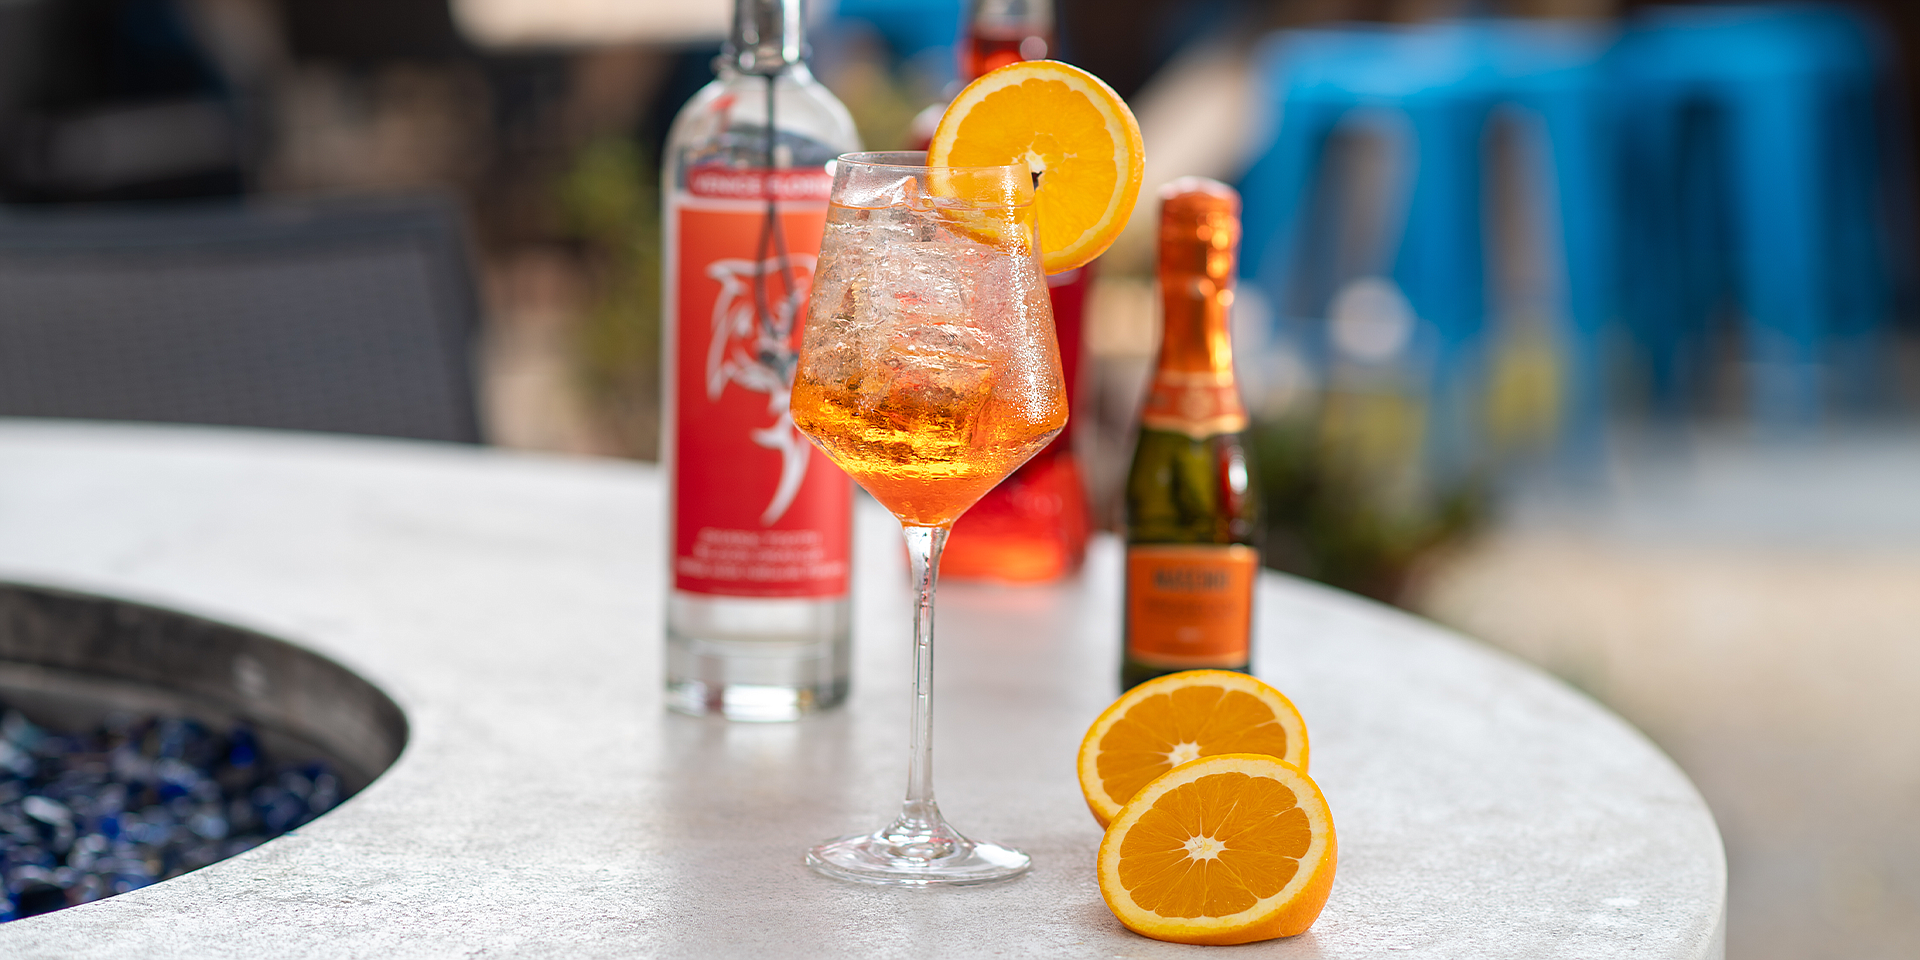 The Blood Orange Aperol Spritz is a newcomer to the cocktail menu at Pop's Sunset Grill.